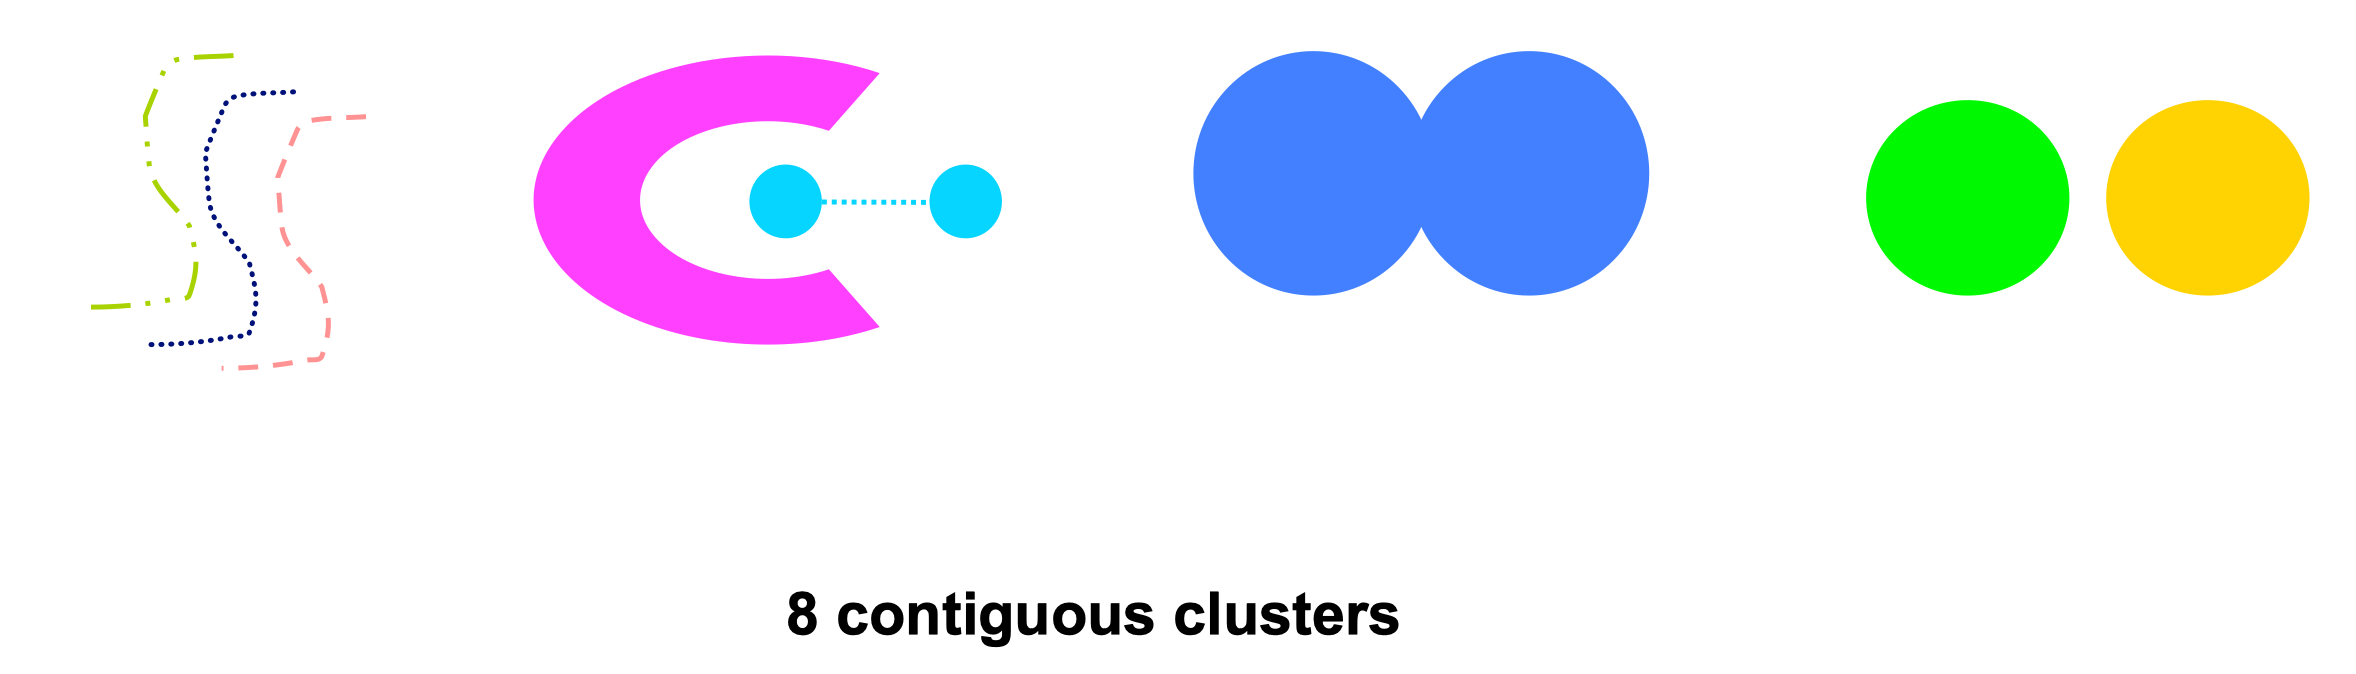 contiguity_based_clusters